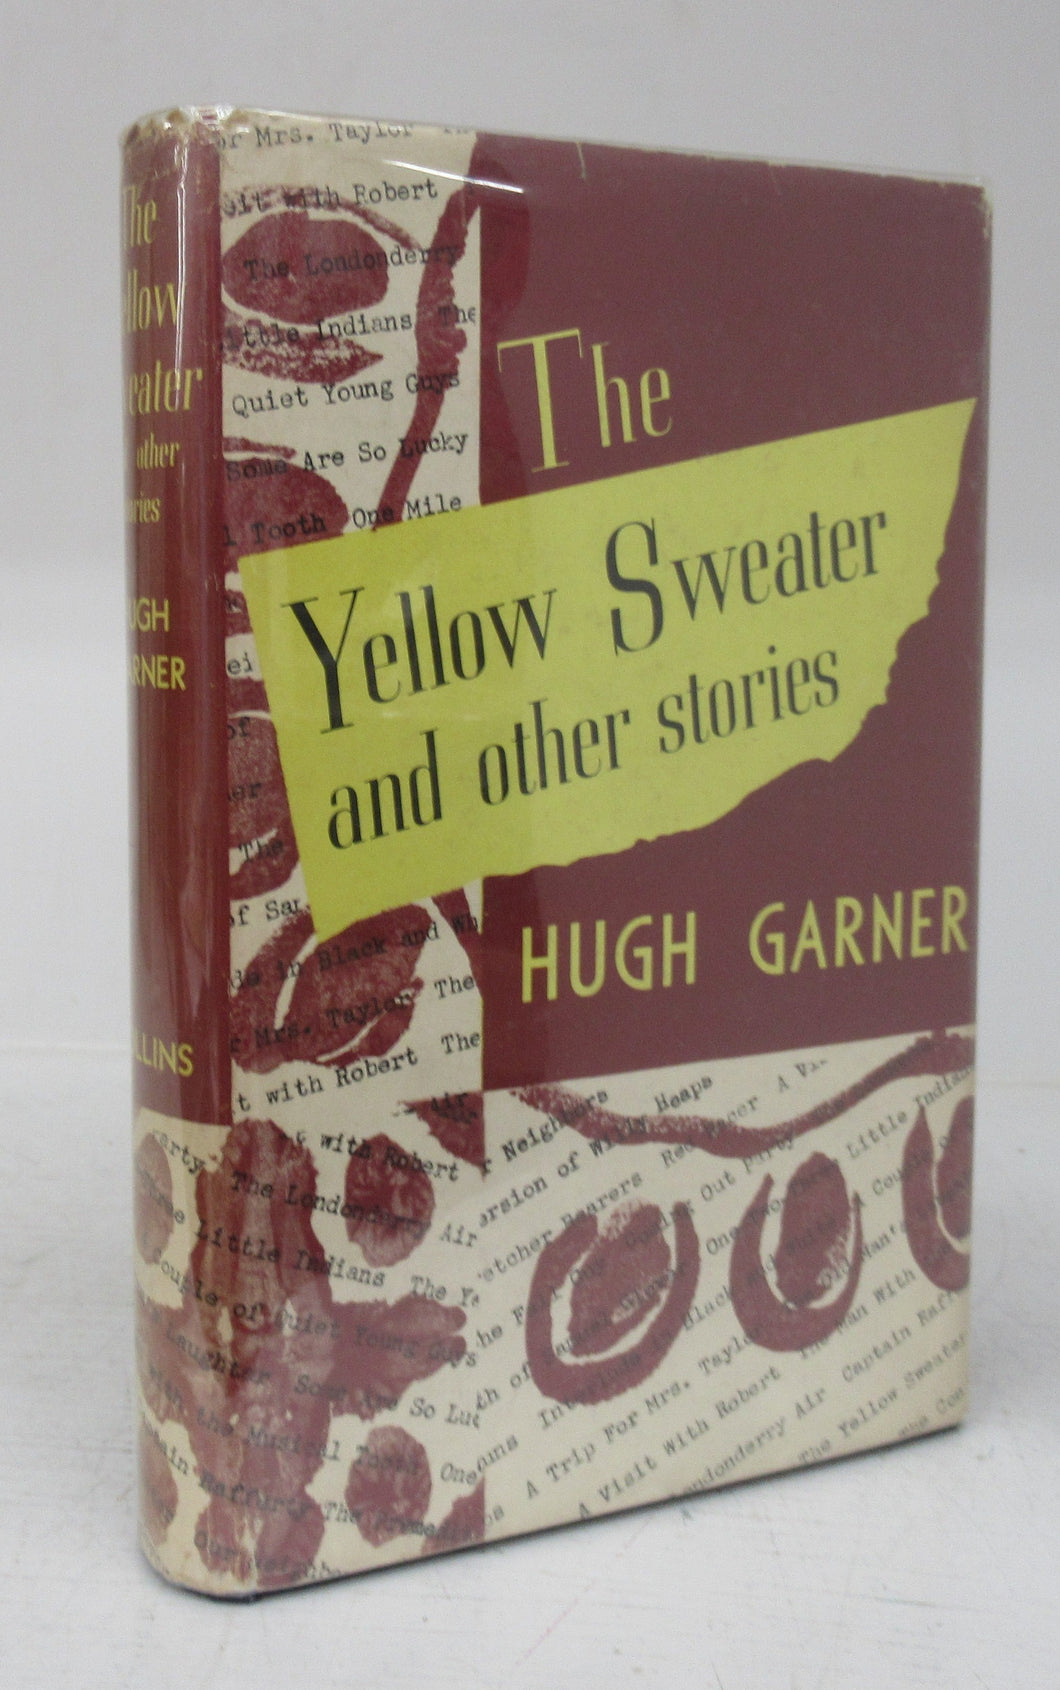 The Yellow Sweater and other stories